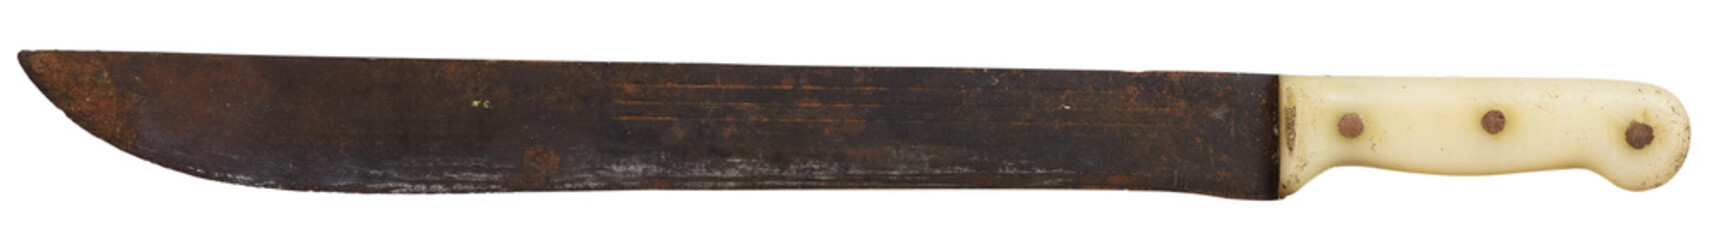 Machete used to cut bushes with an old and rusty appearance.